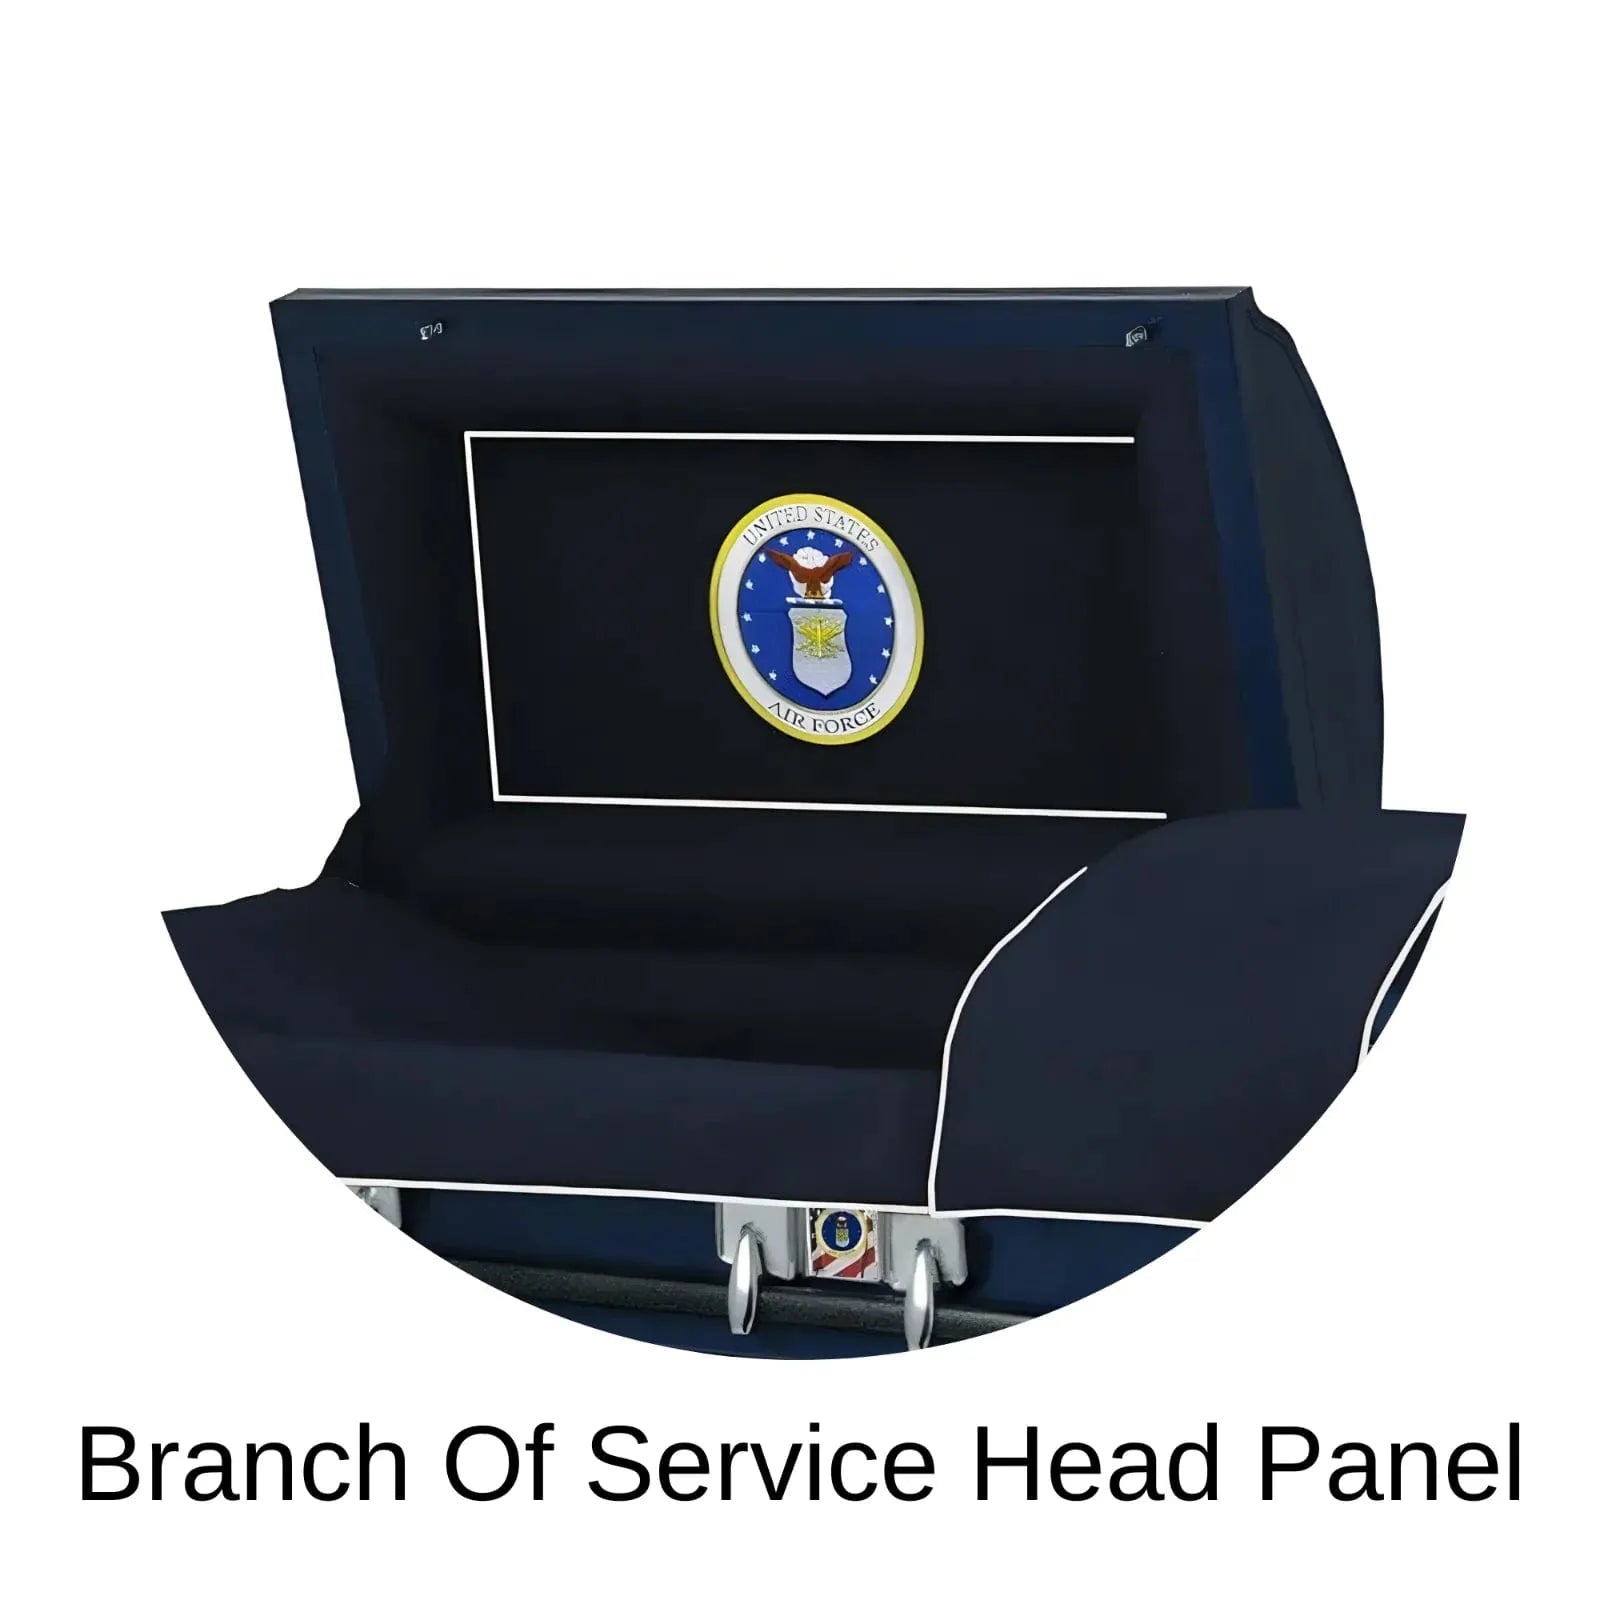 Air Force Casket with Branch of Service Head Panel